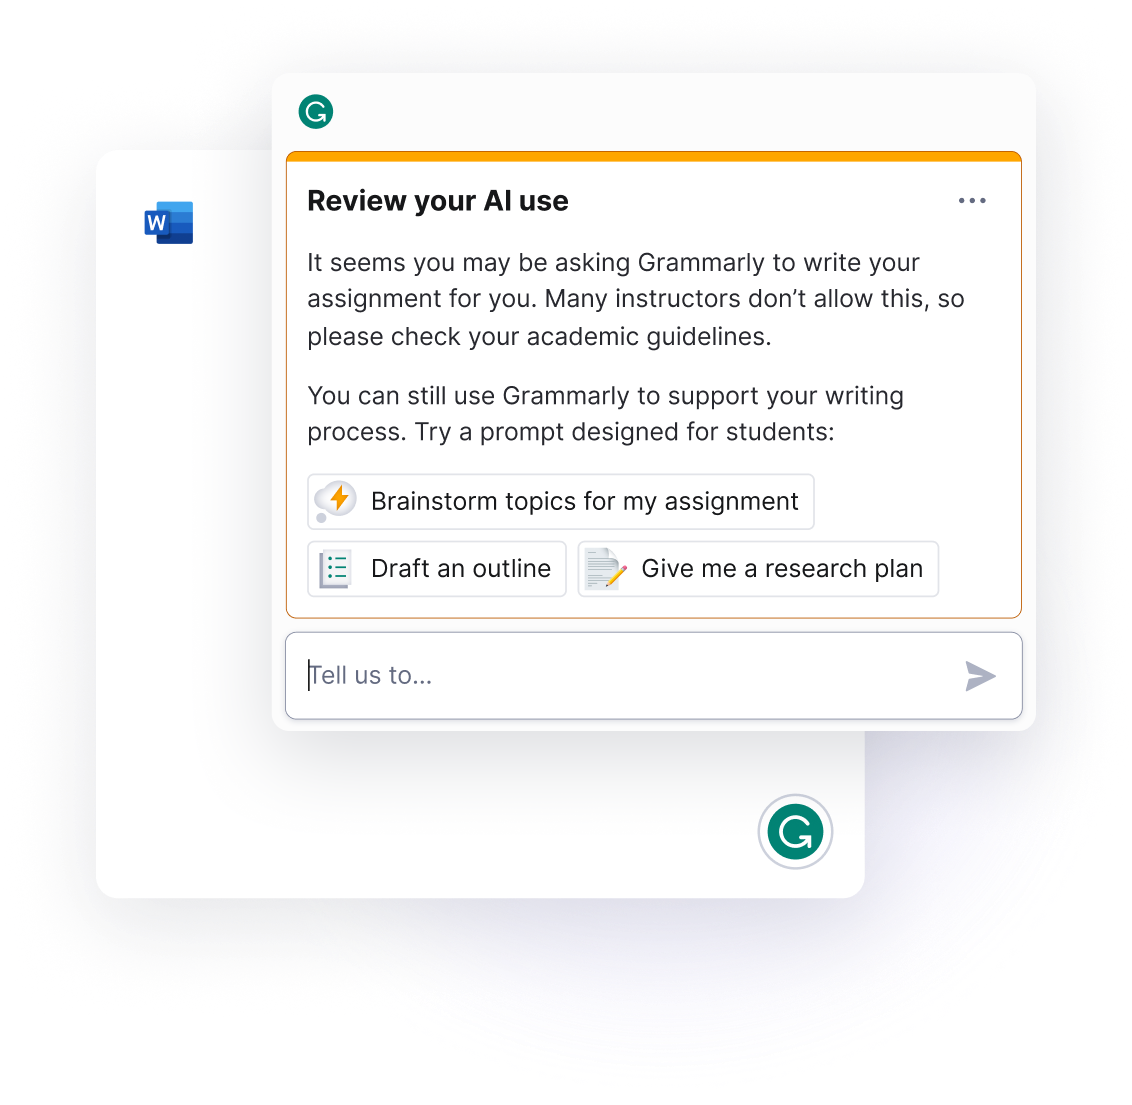 Grammarly reviews your AI use